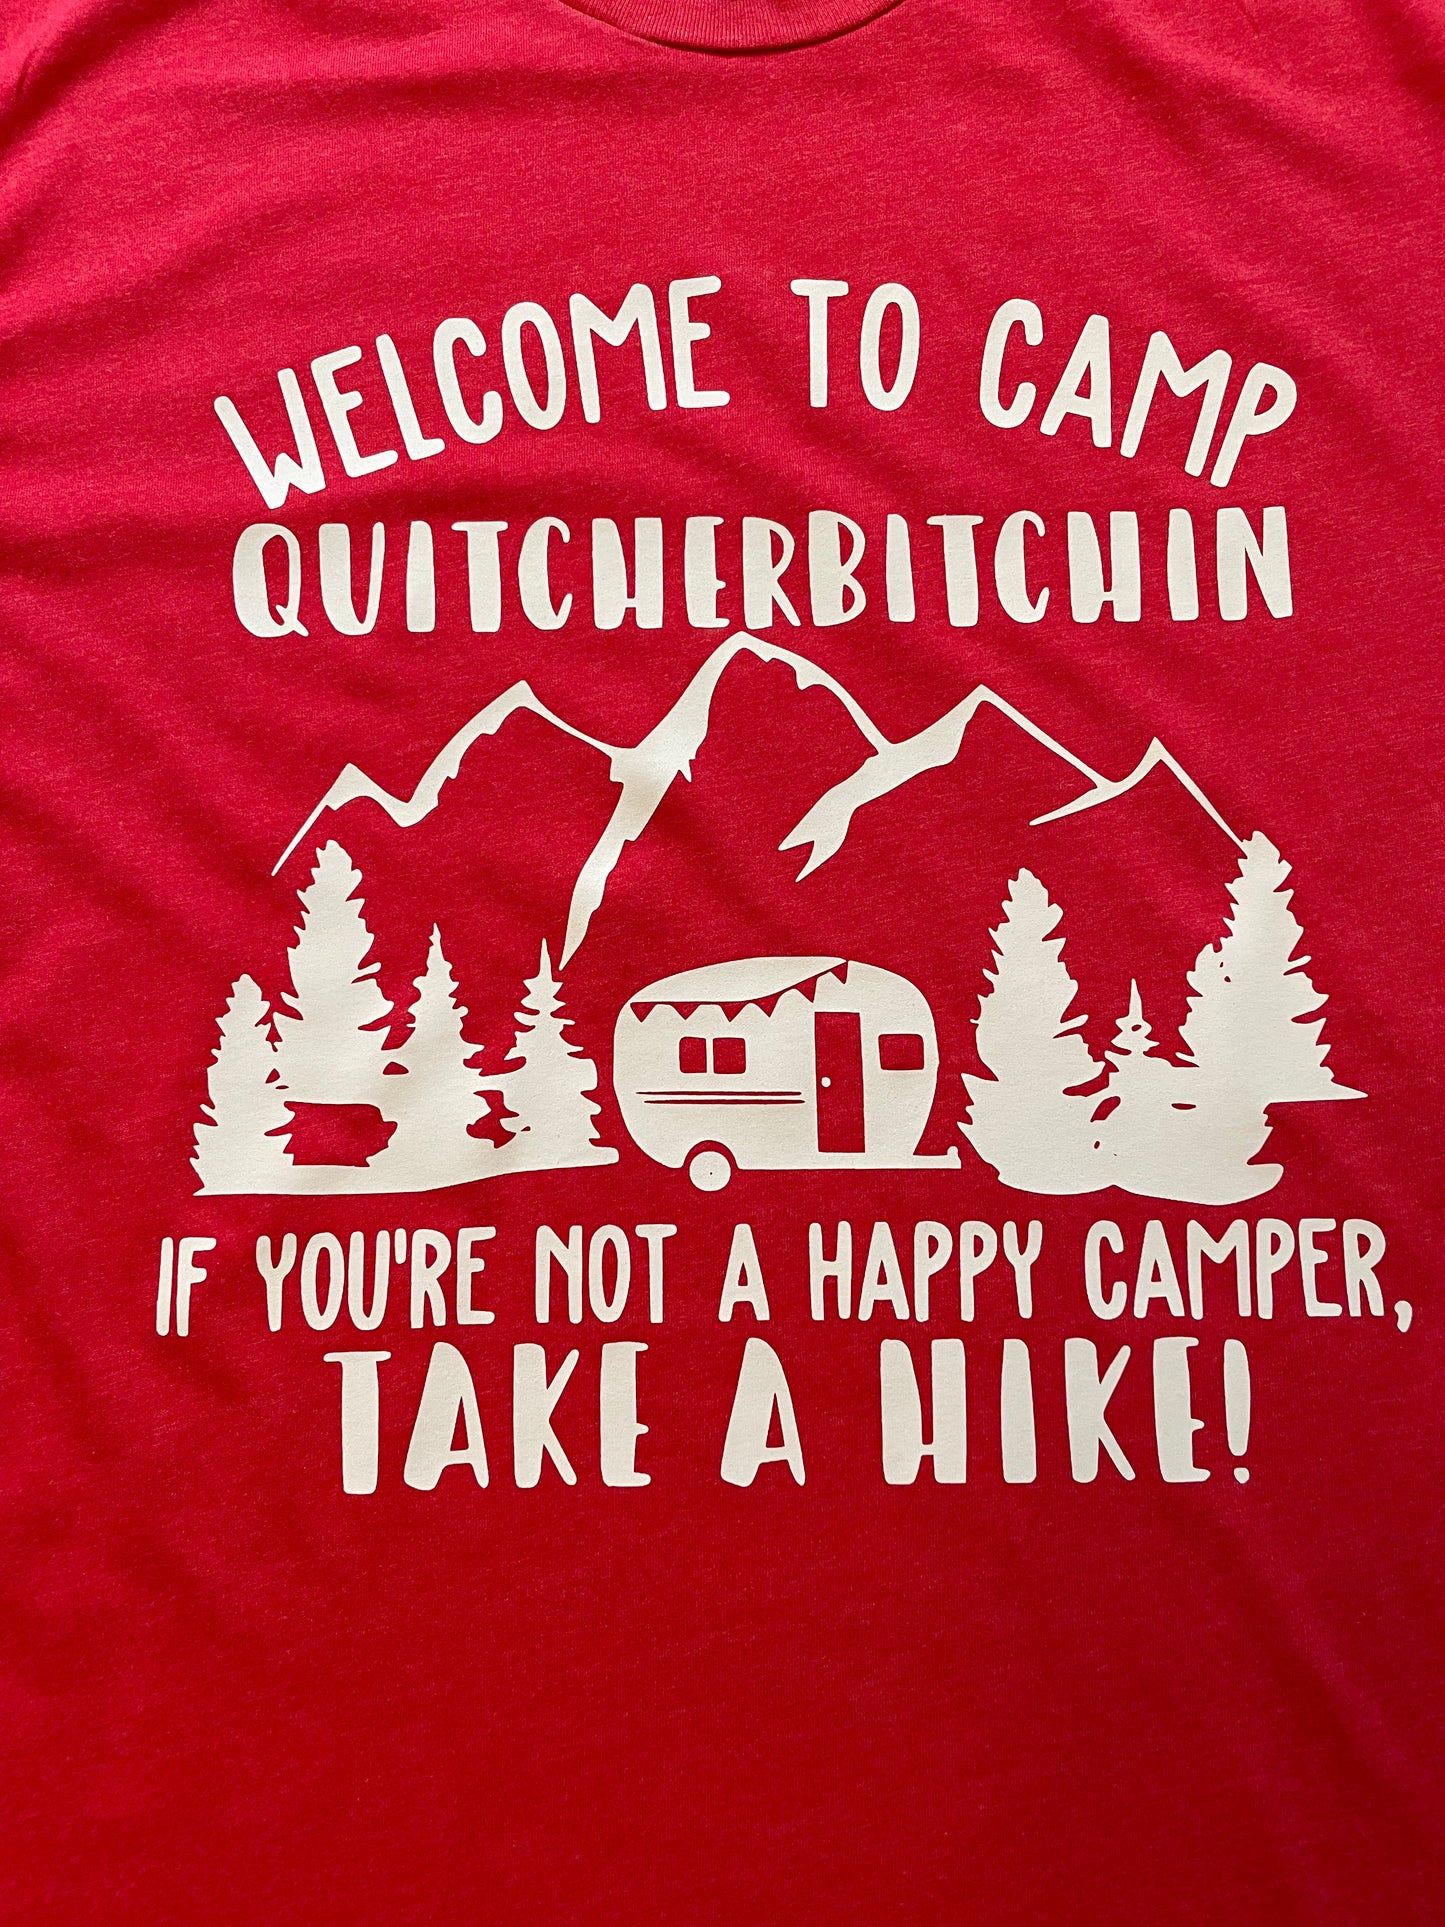 Welcome to Camp….